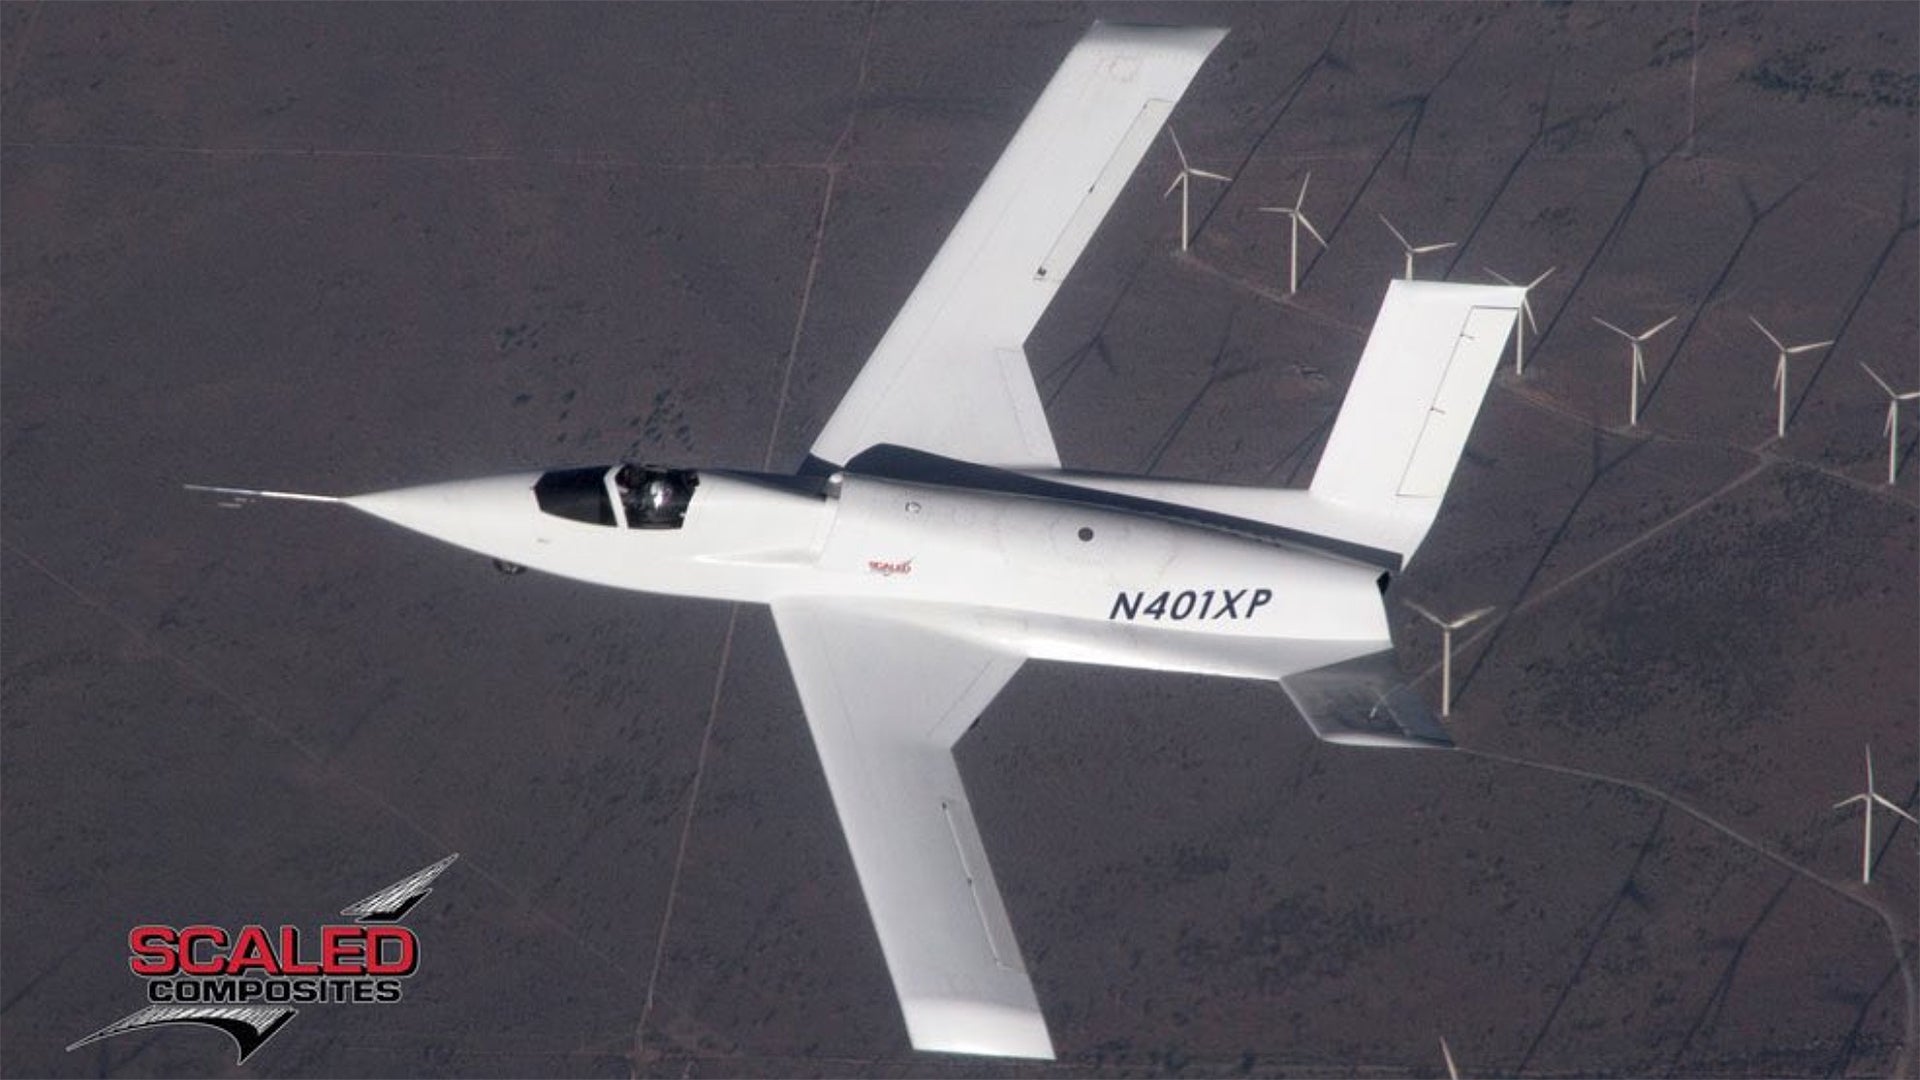 Check Out Scaled Composites’ New Exotic And Stealthy Test Aircraft